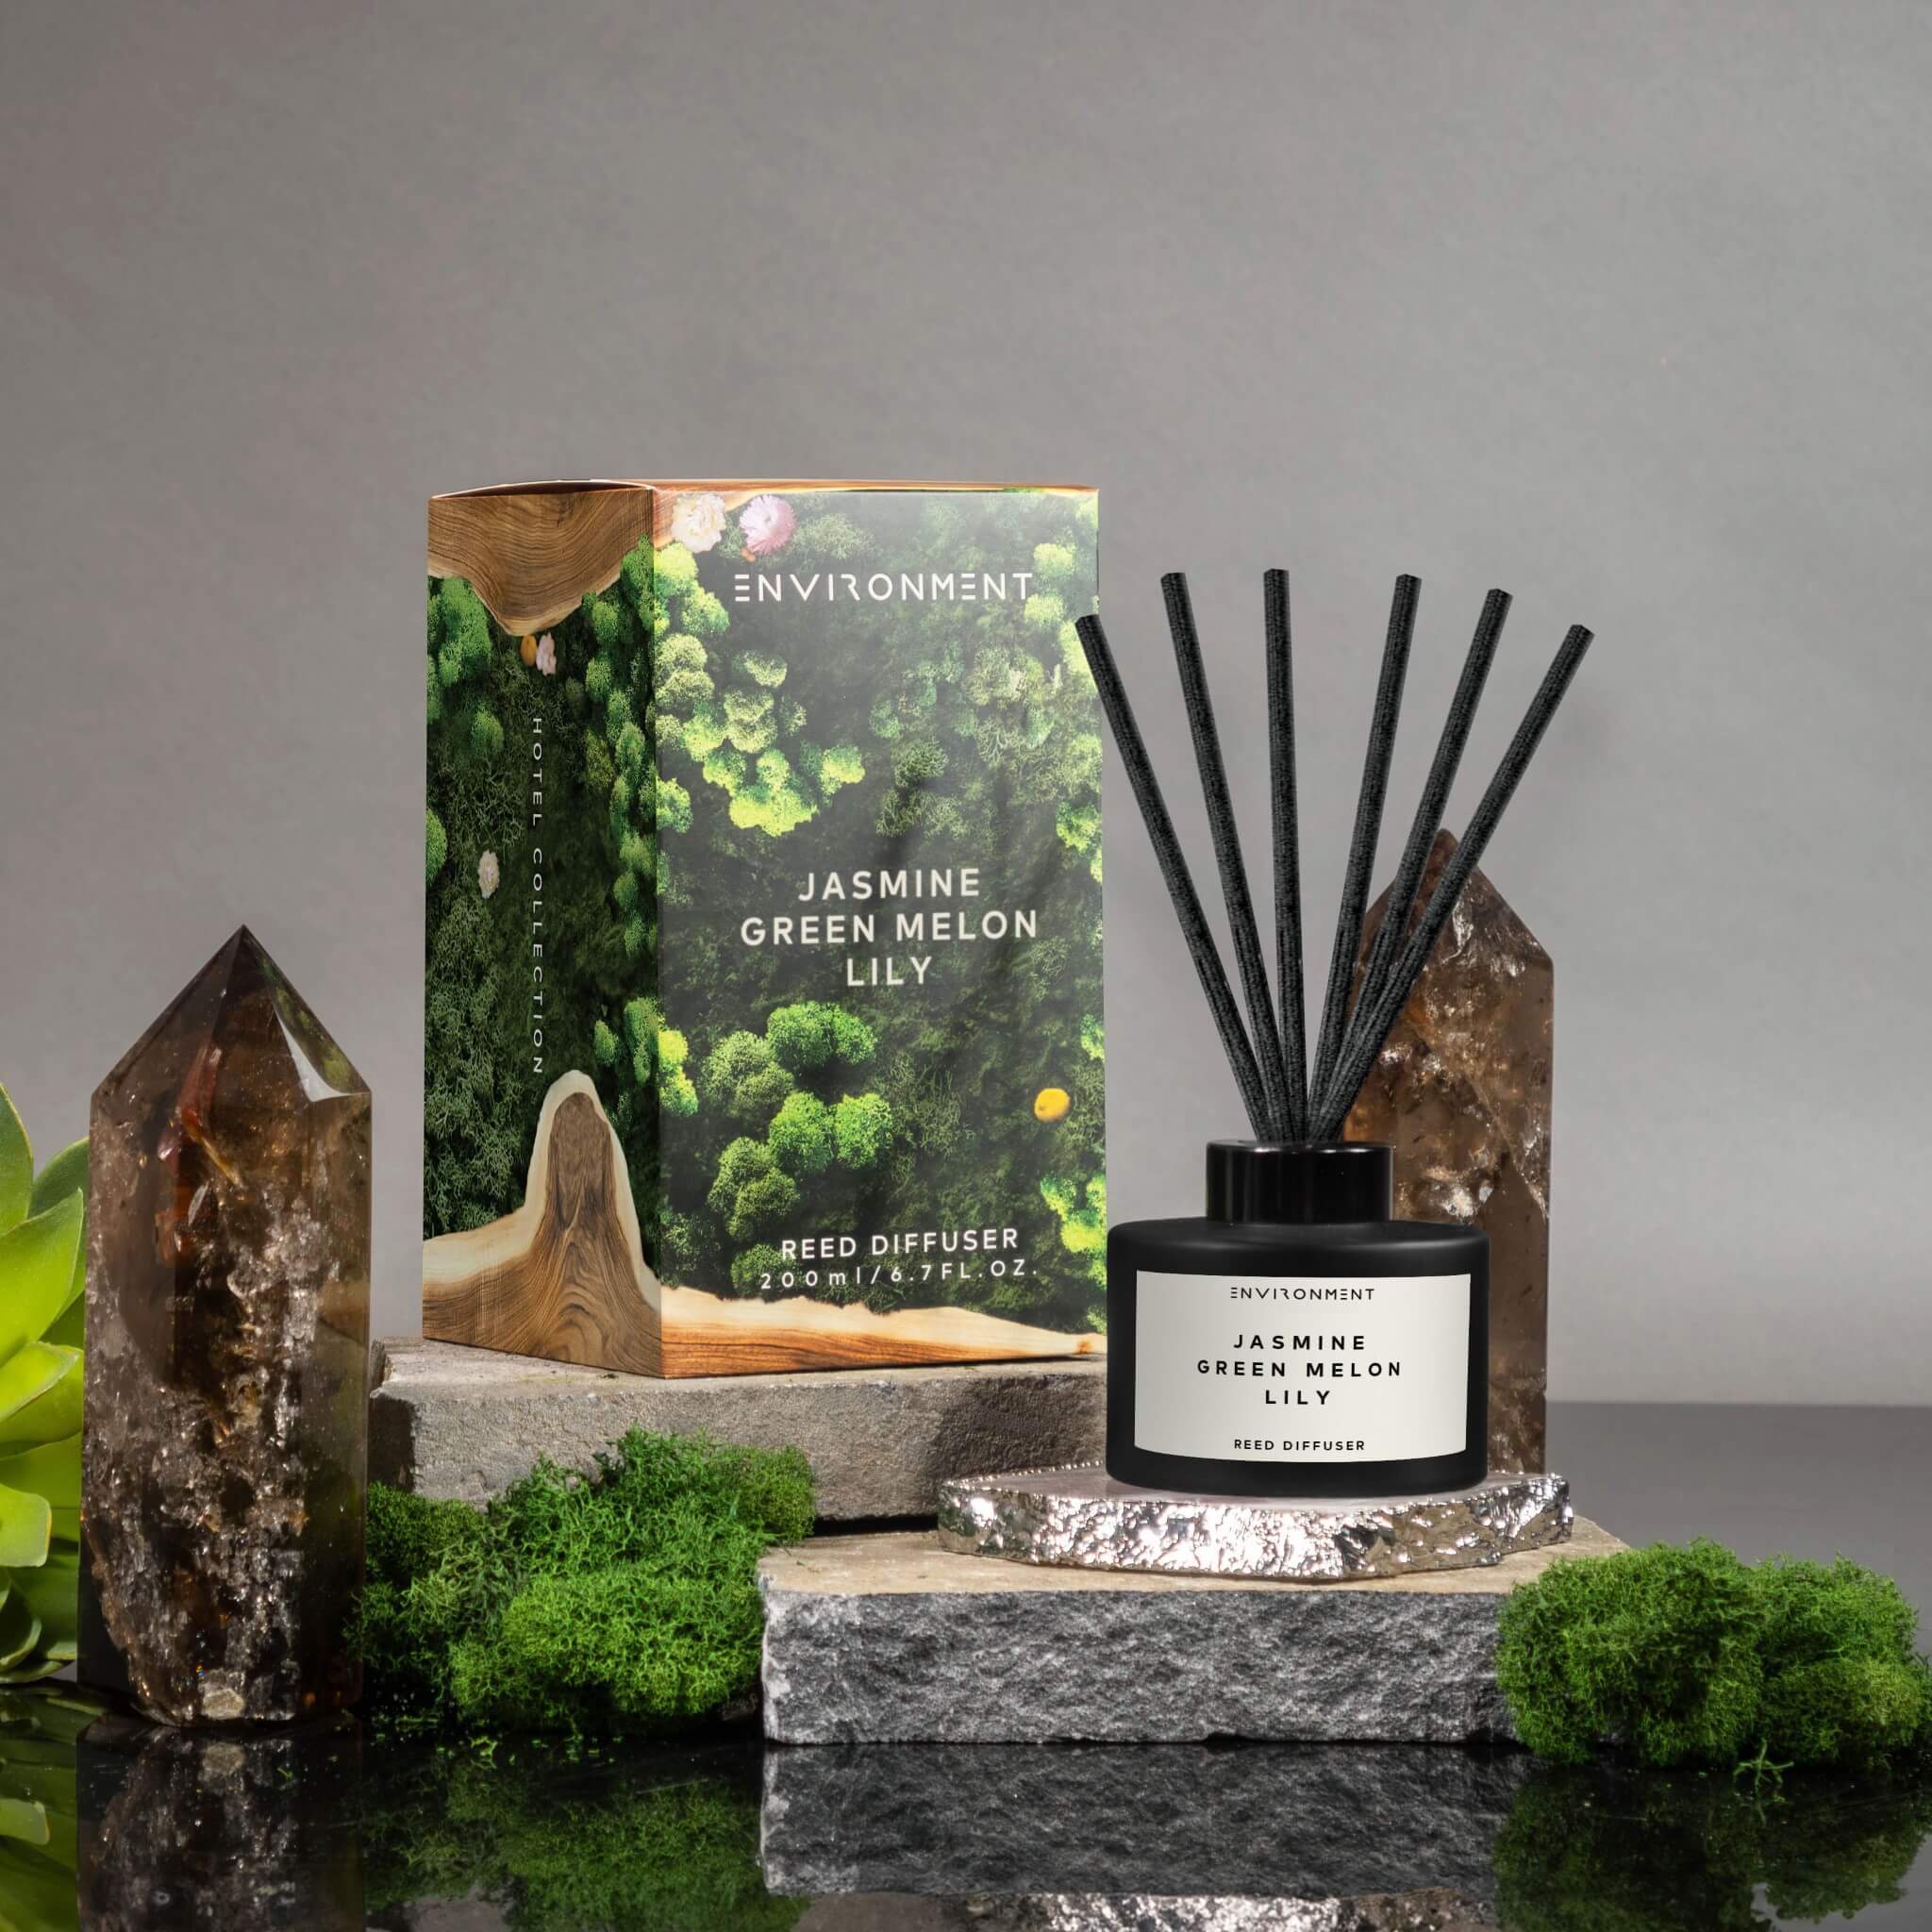 Jasmine | Green Melon | Lily Diffuser (Inspired by The Wynn Hotel®)